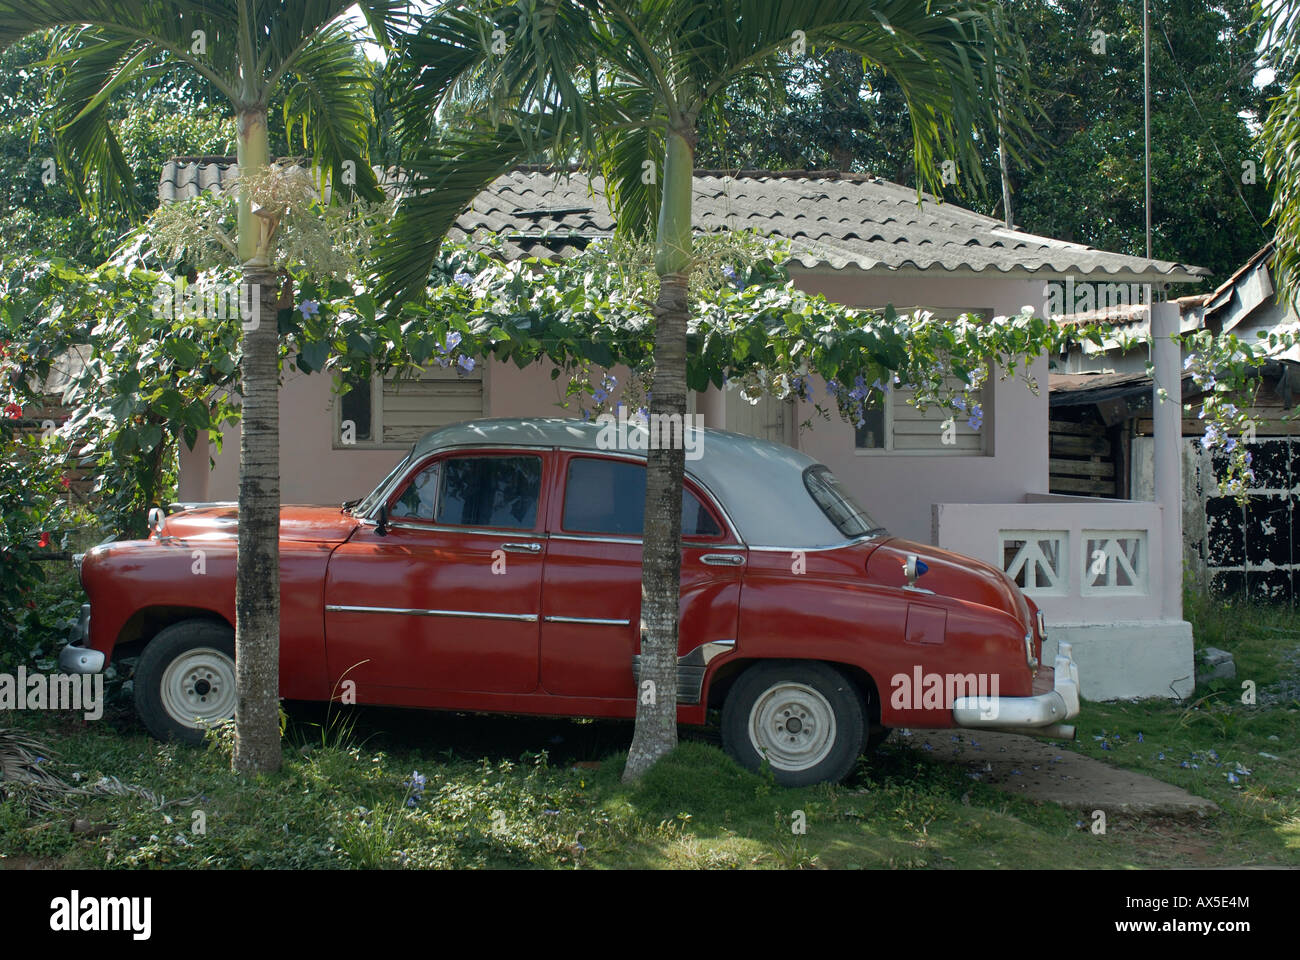 Red vintage car parking in the garden beside a house in Pinar del Rio, Vinales, Cuba, Caribbean Stock Photo